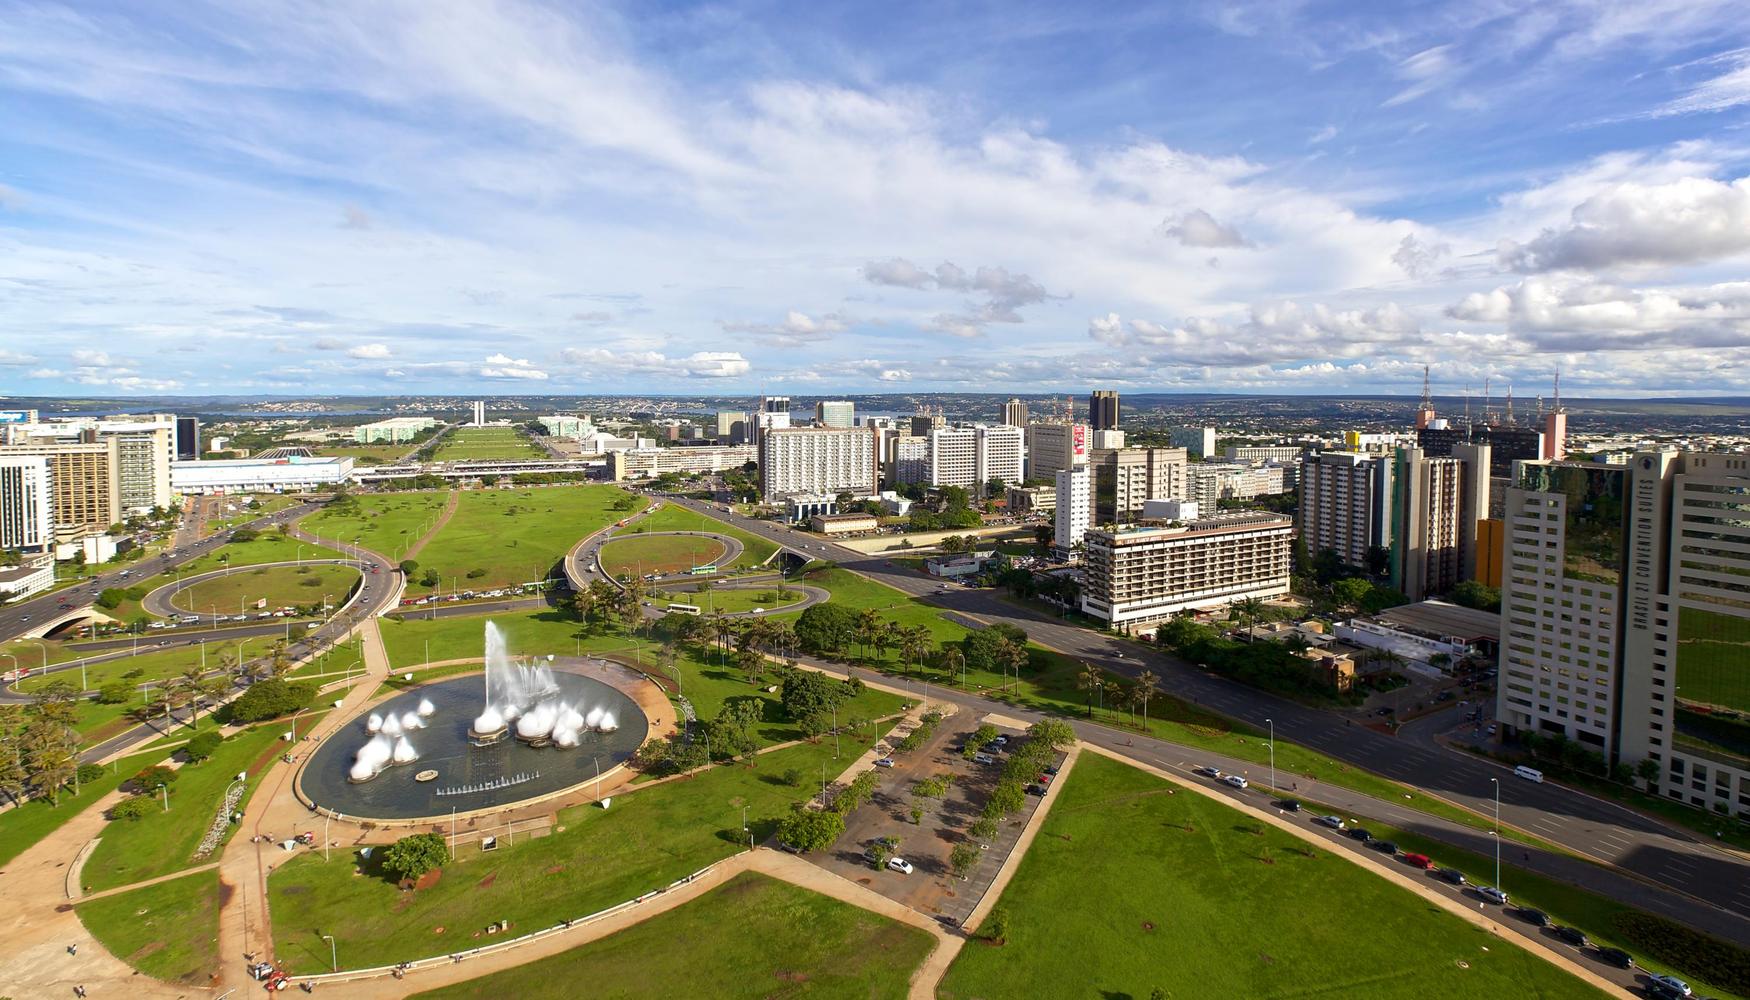 This Travel Quiz Is Scientifically Designed to Determine the Time Period You Belong in Brasilia, Brazil